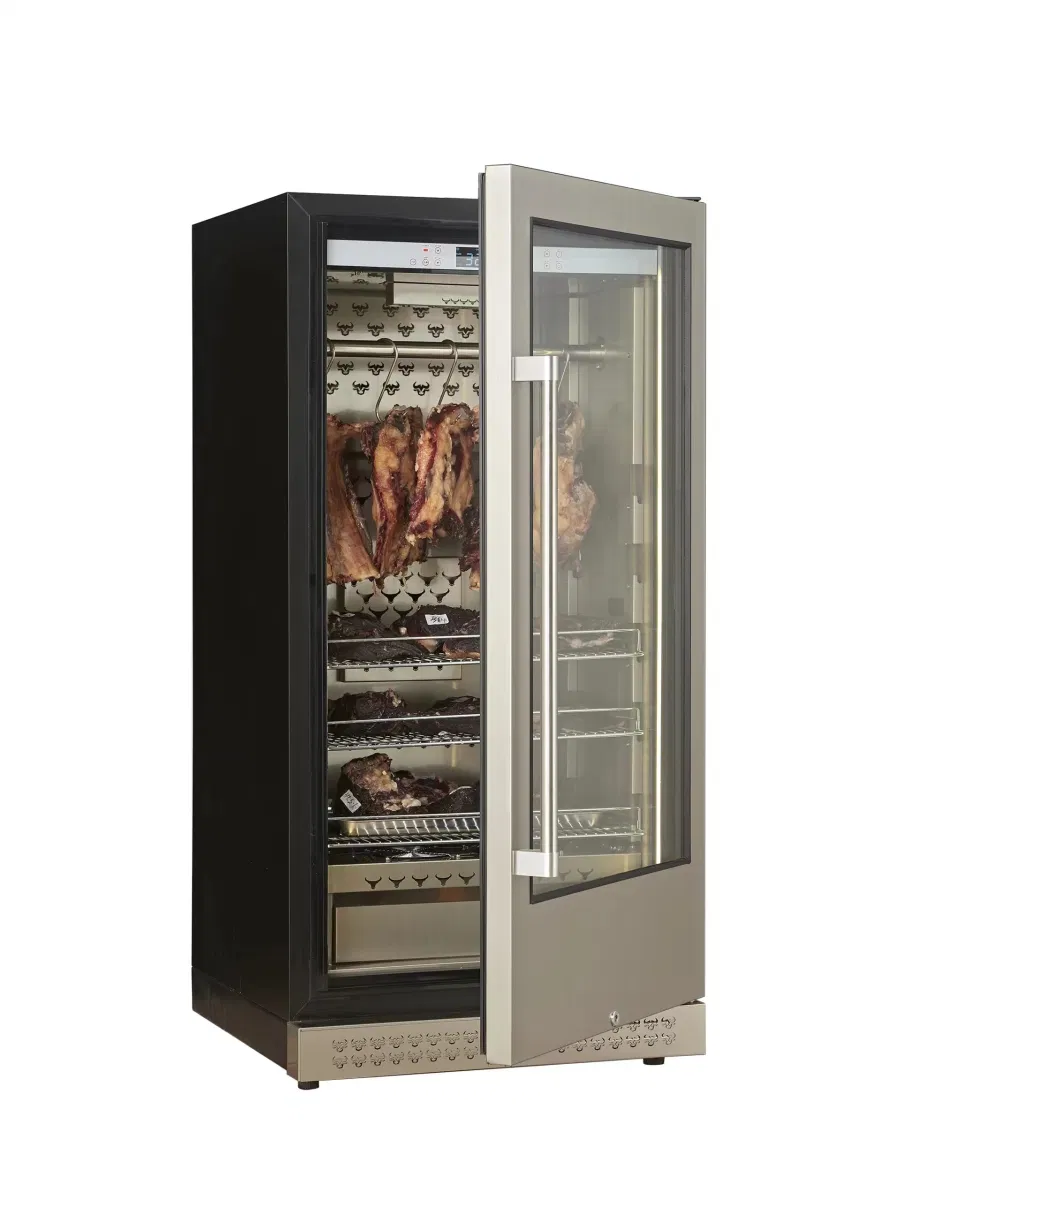 Hotsale Wholesale Commercial Dry Aging Hanging Meat Aging Refrigerator for Meat Aging Refrigerator